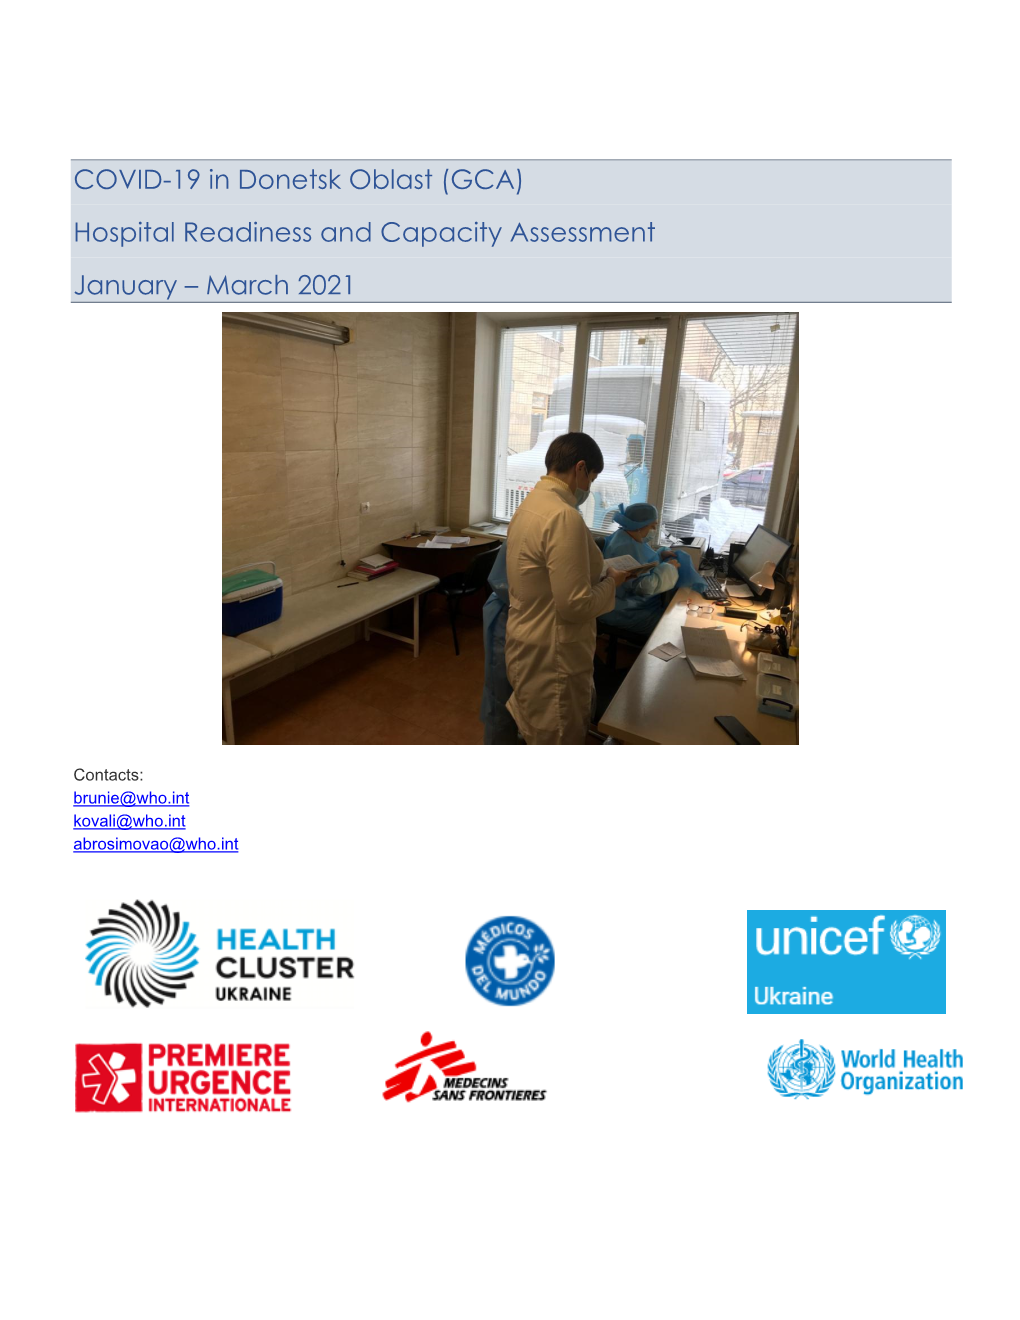 COVID-19 in Donetsk Oblast (GCA) Hospital Readiness and Capacity Assessment January – March 2021